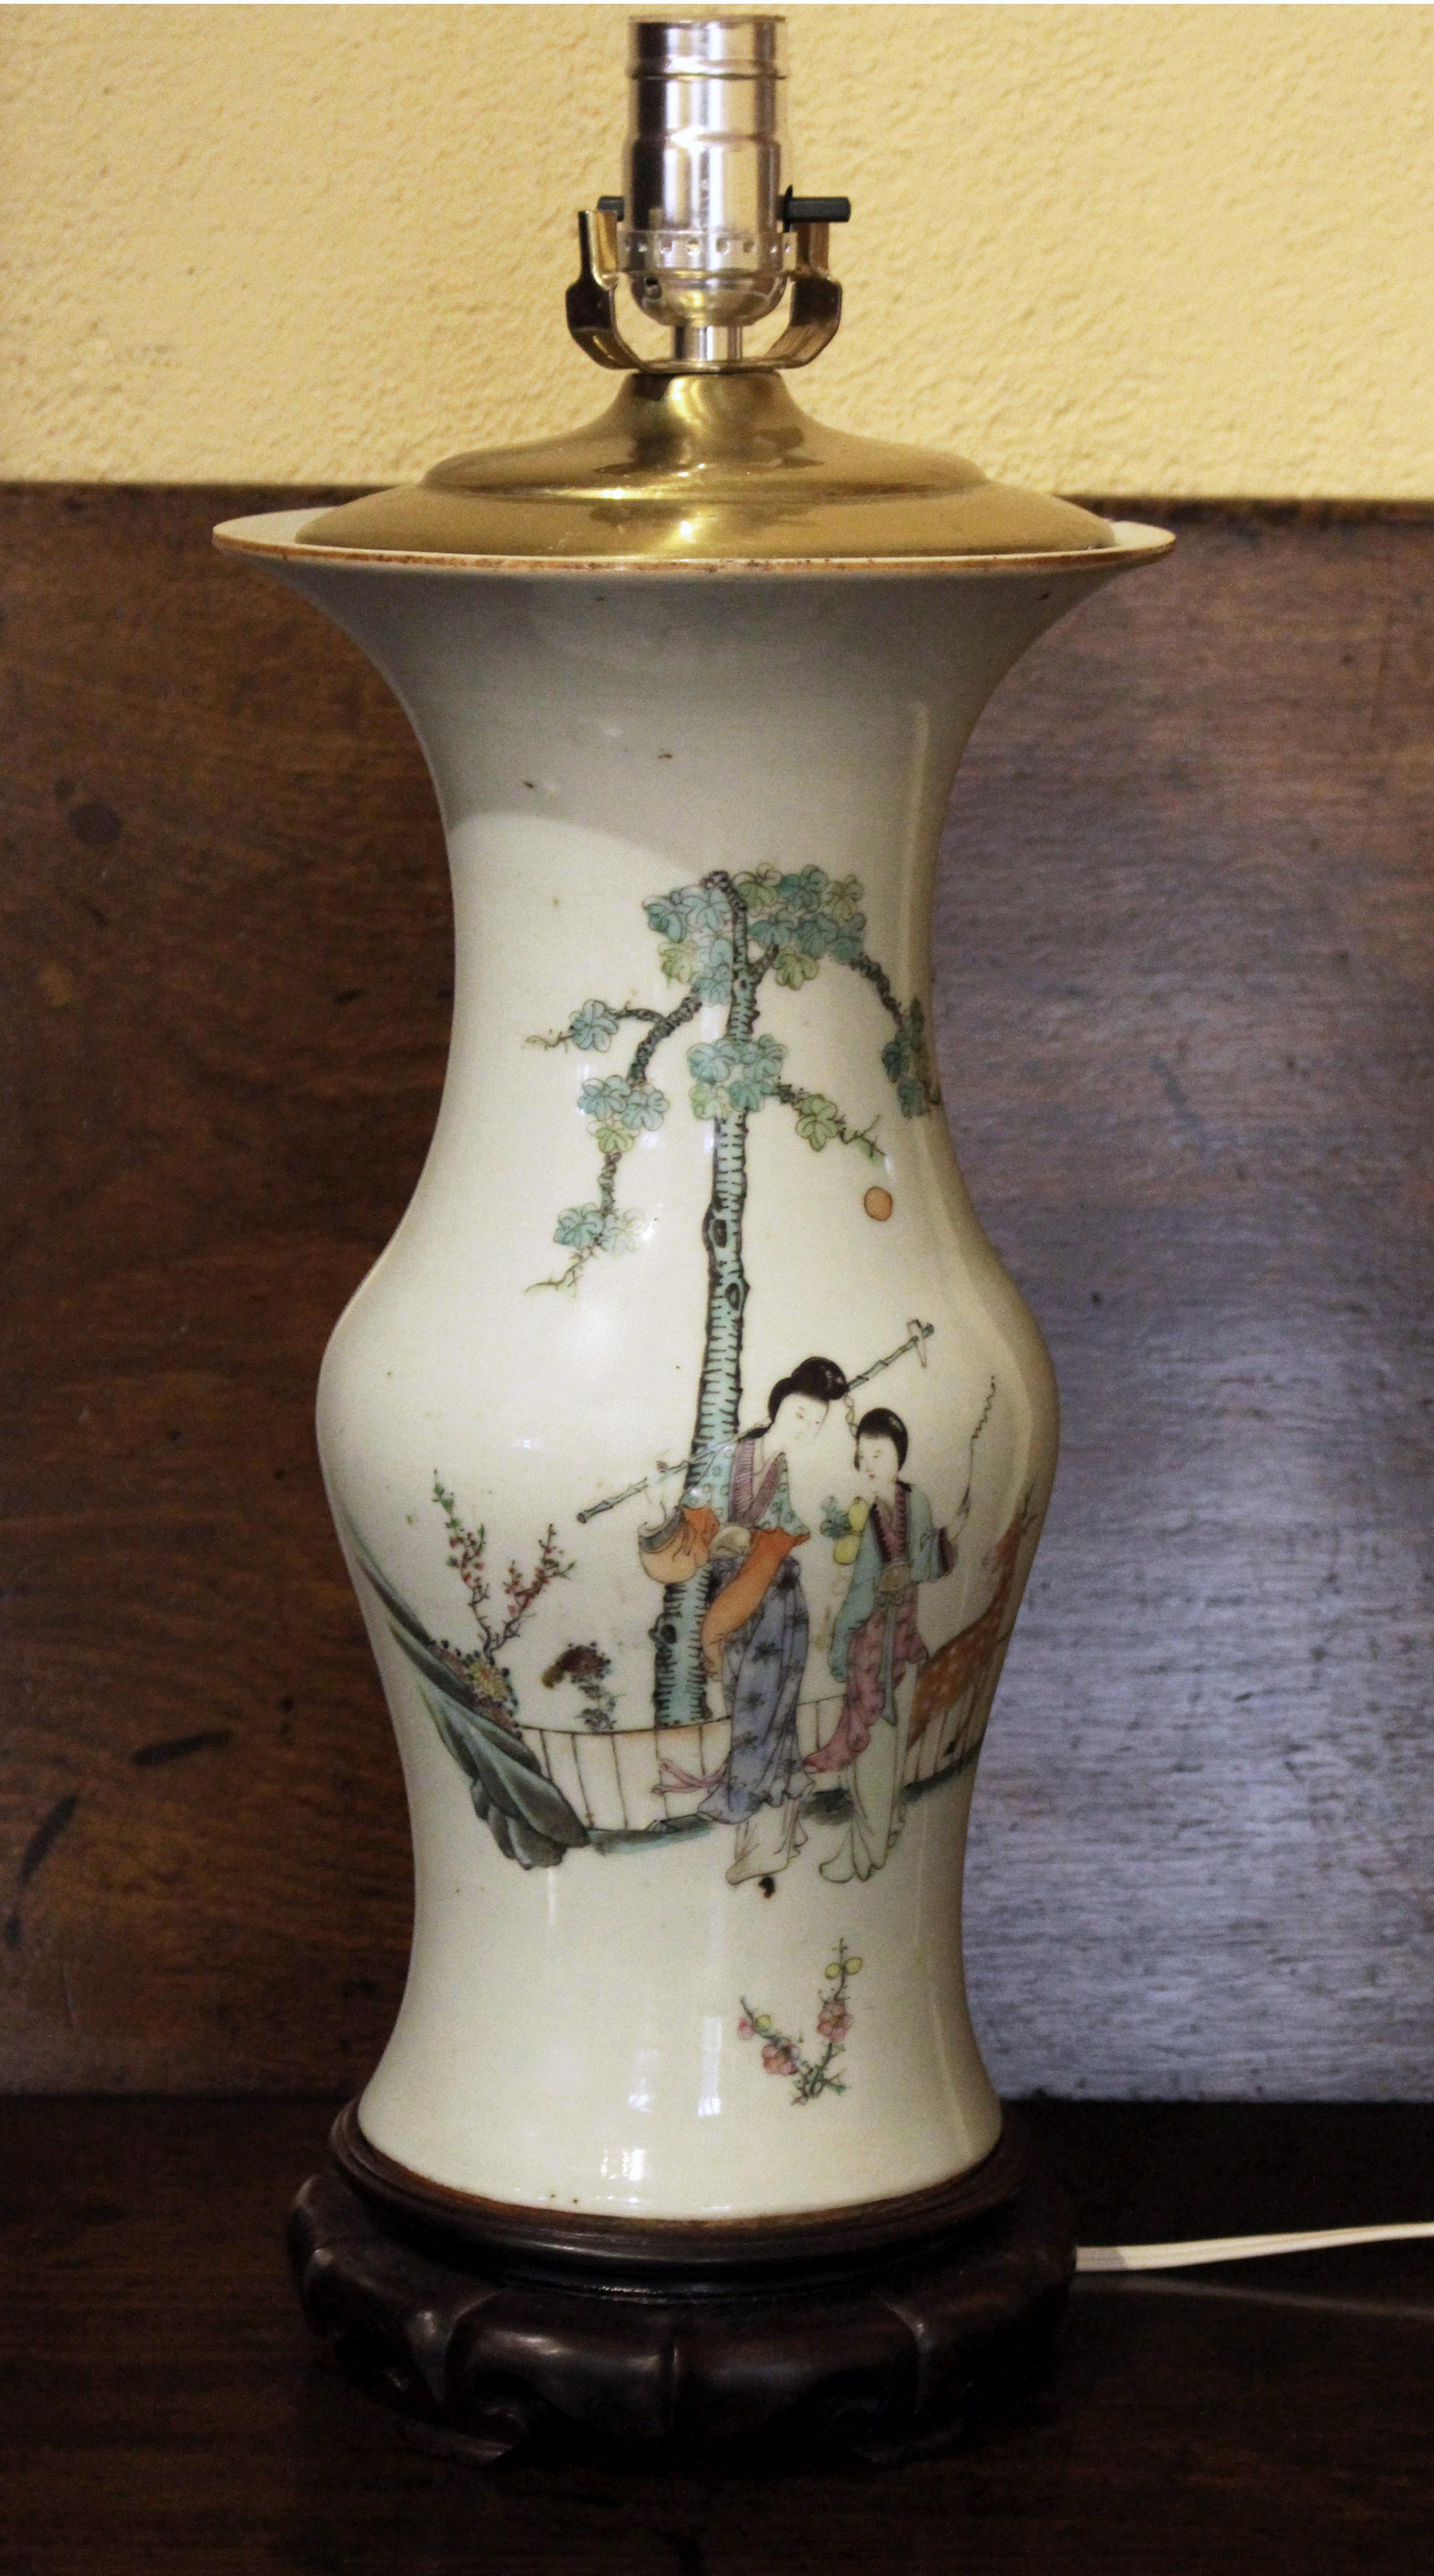 Circa 1880s Chinese export baluster form vase lamp. Late Qing dynasty. Light celadon ground. Elegant woman with a fawn under a pine tree. Old top of rim fleck. Spinach jade finial. Measures: 31